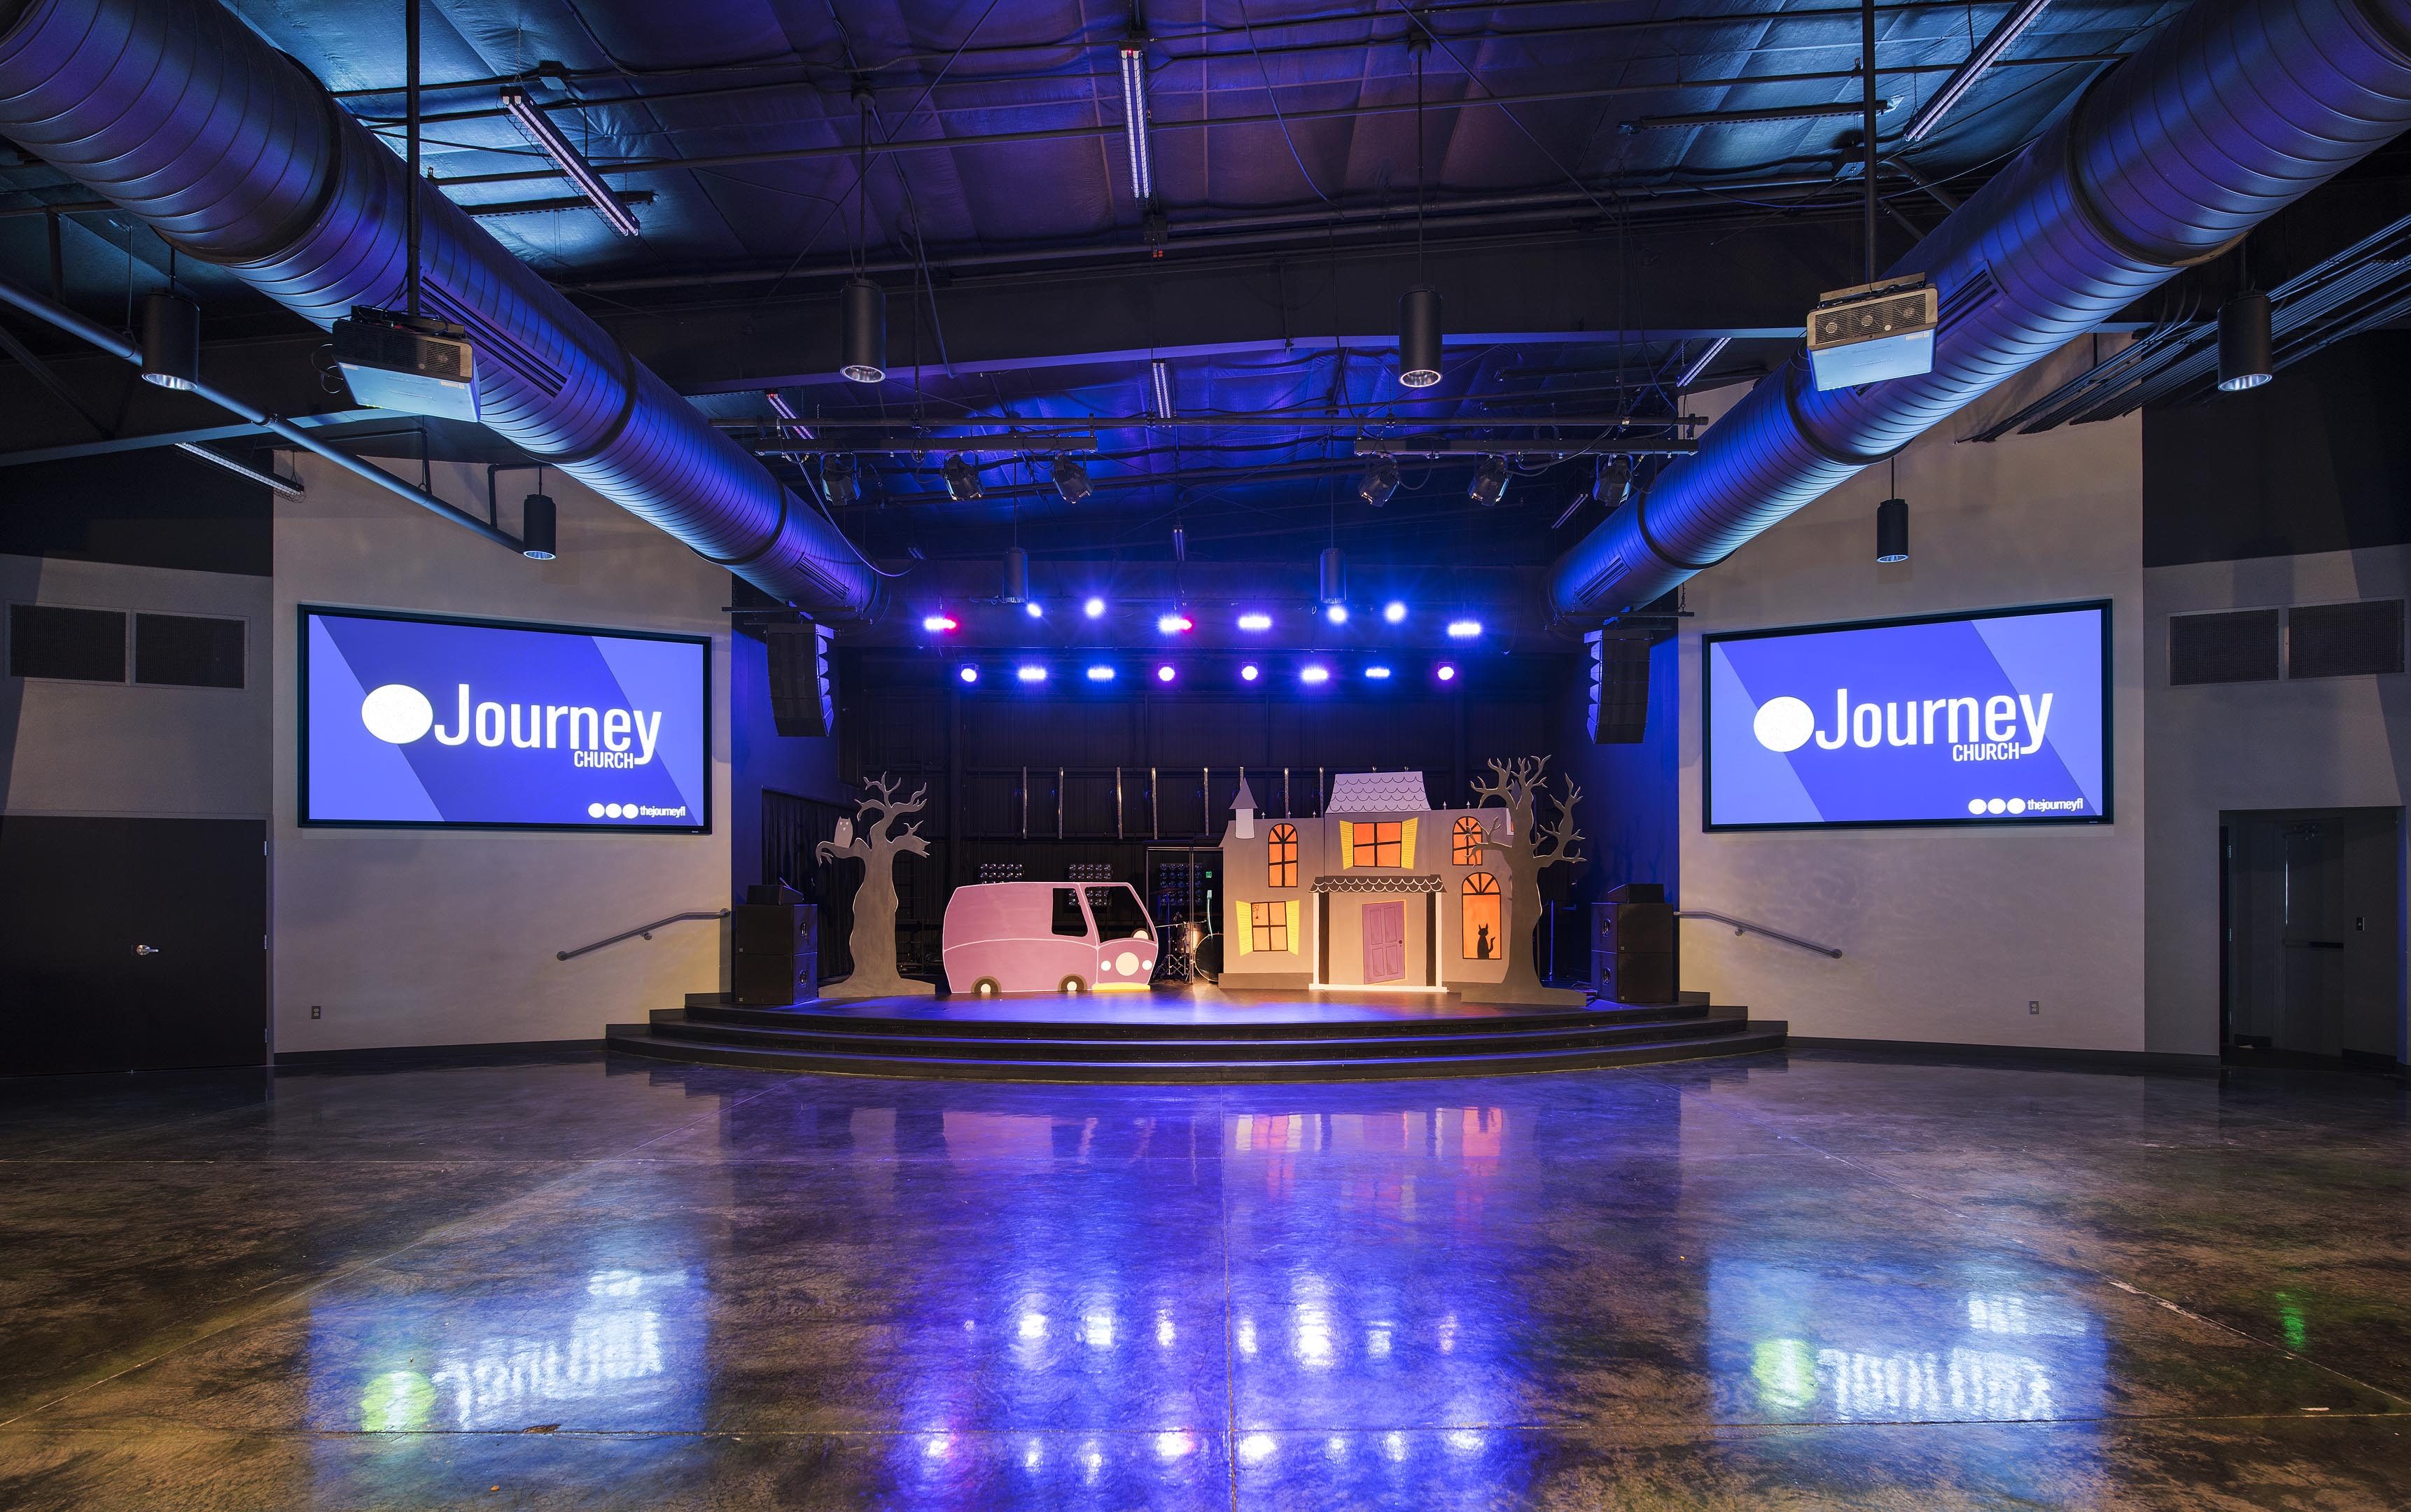 The Journey Church Ministry Building - Interior Photo